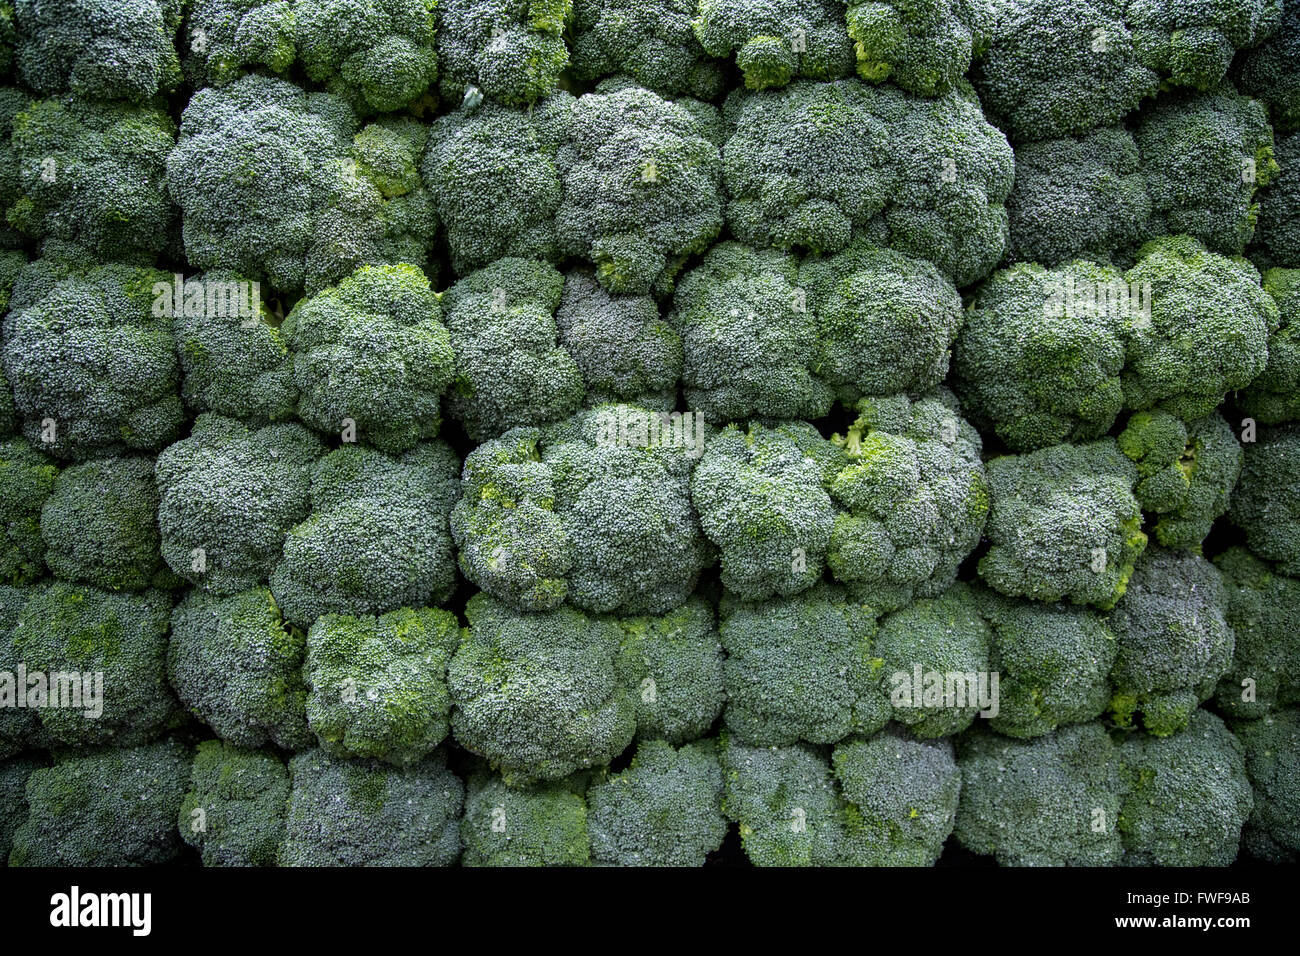 a tightly packed stack of broccoli on display in the produce section of a grocery store Stock Photo